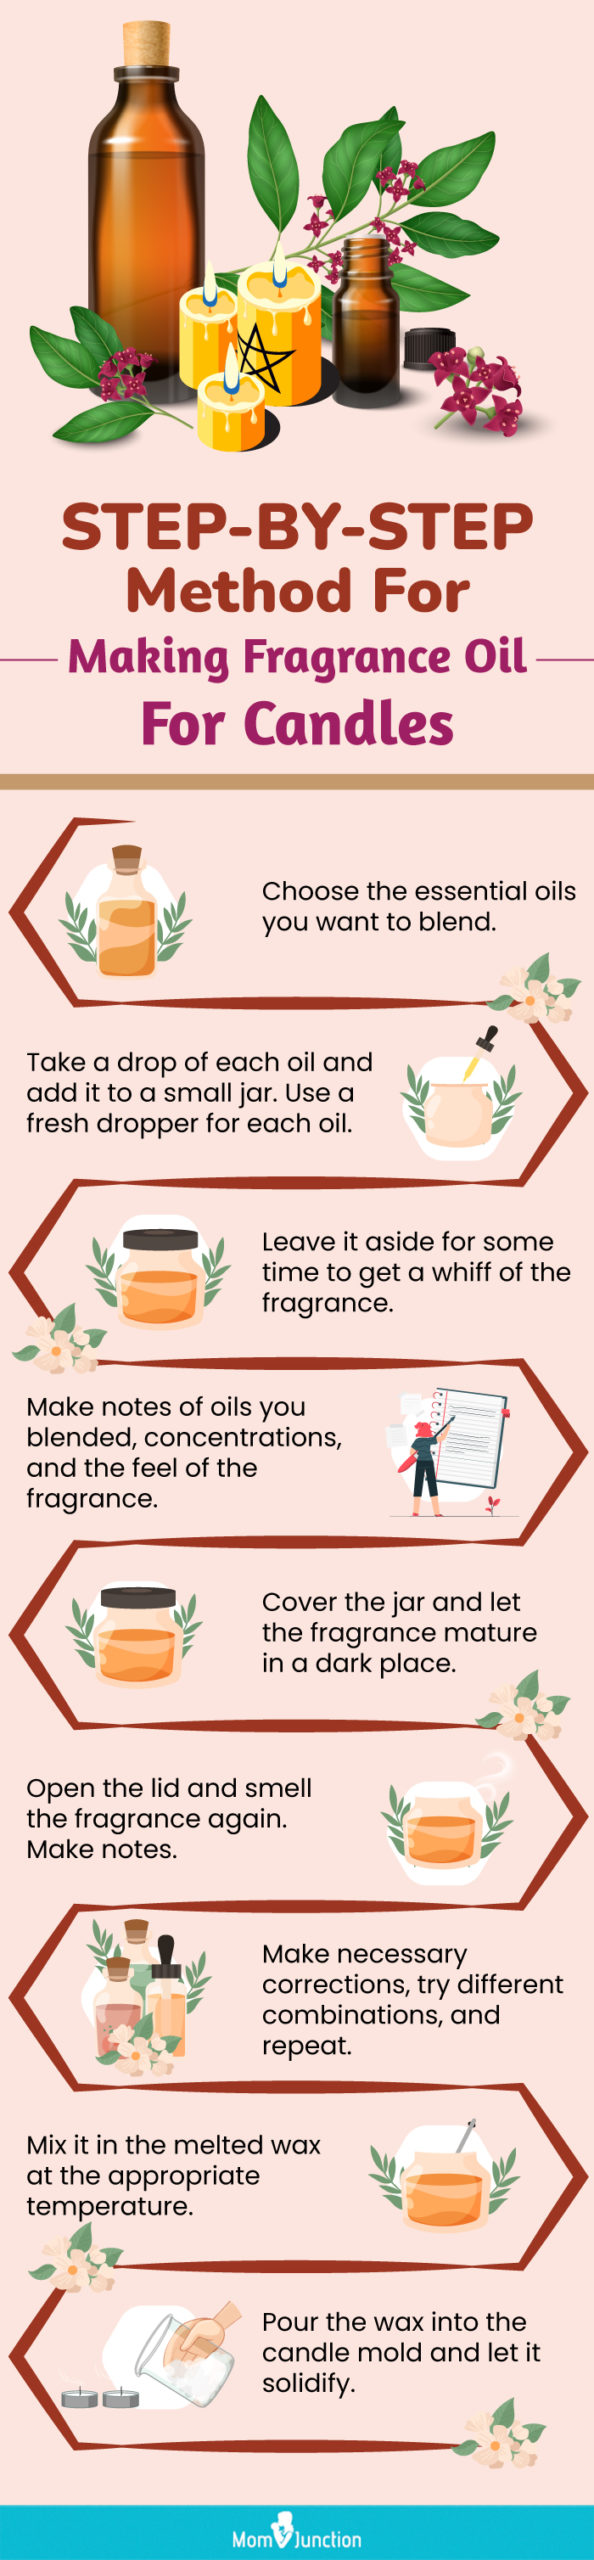 Step By Step Method For Making Fragrance Oil For Candles(infographic)